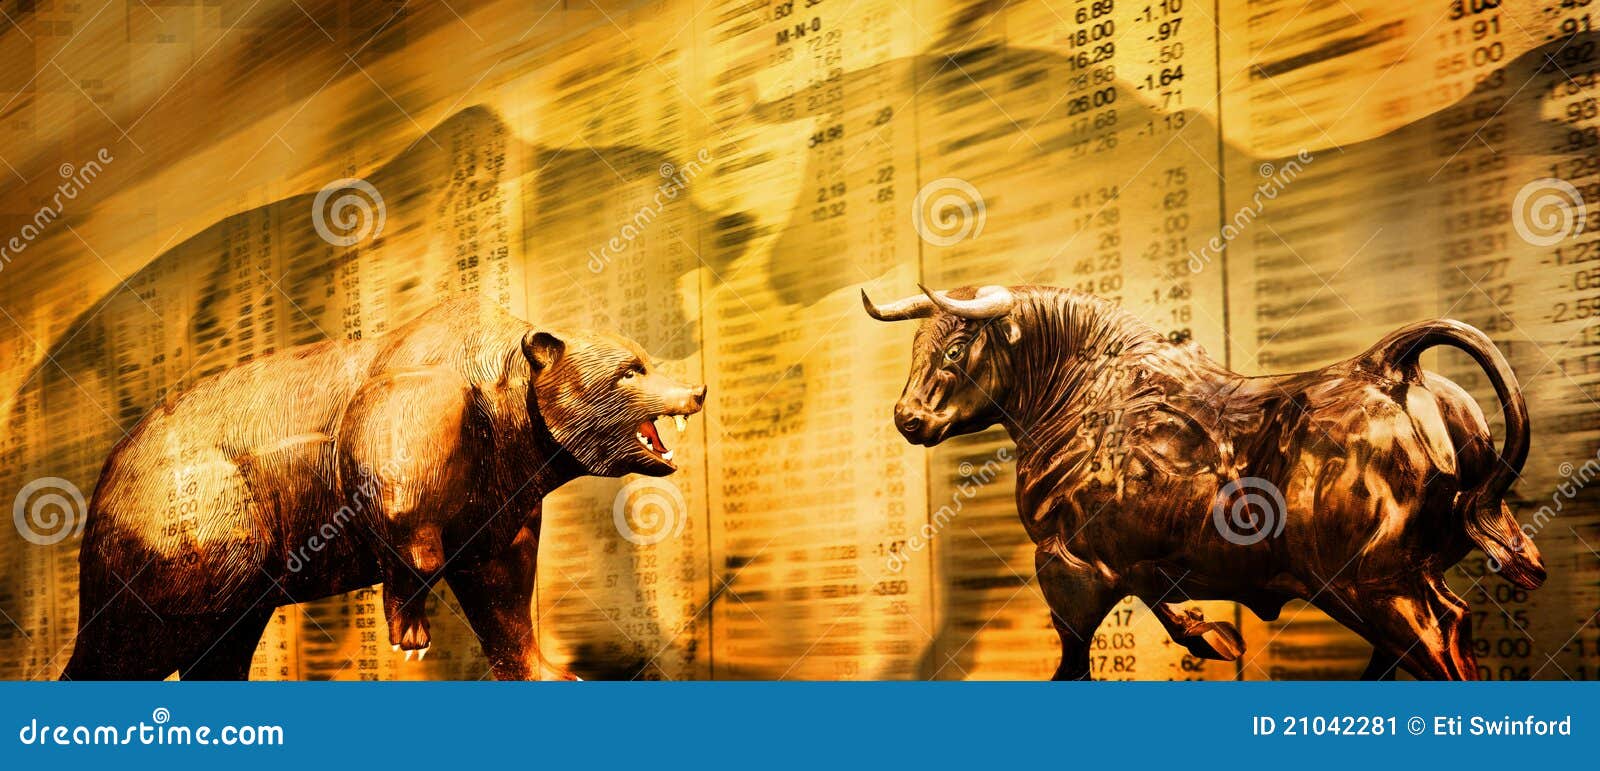 is the stock market a bull or bear